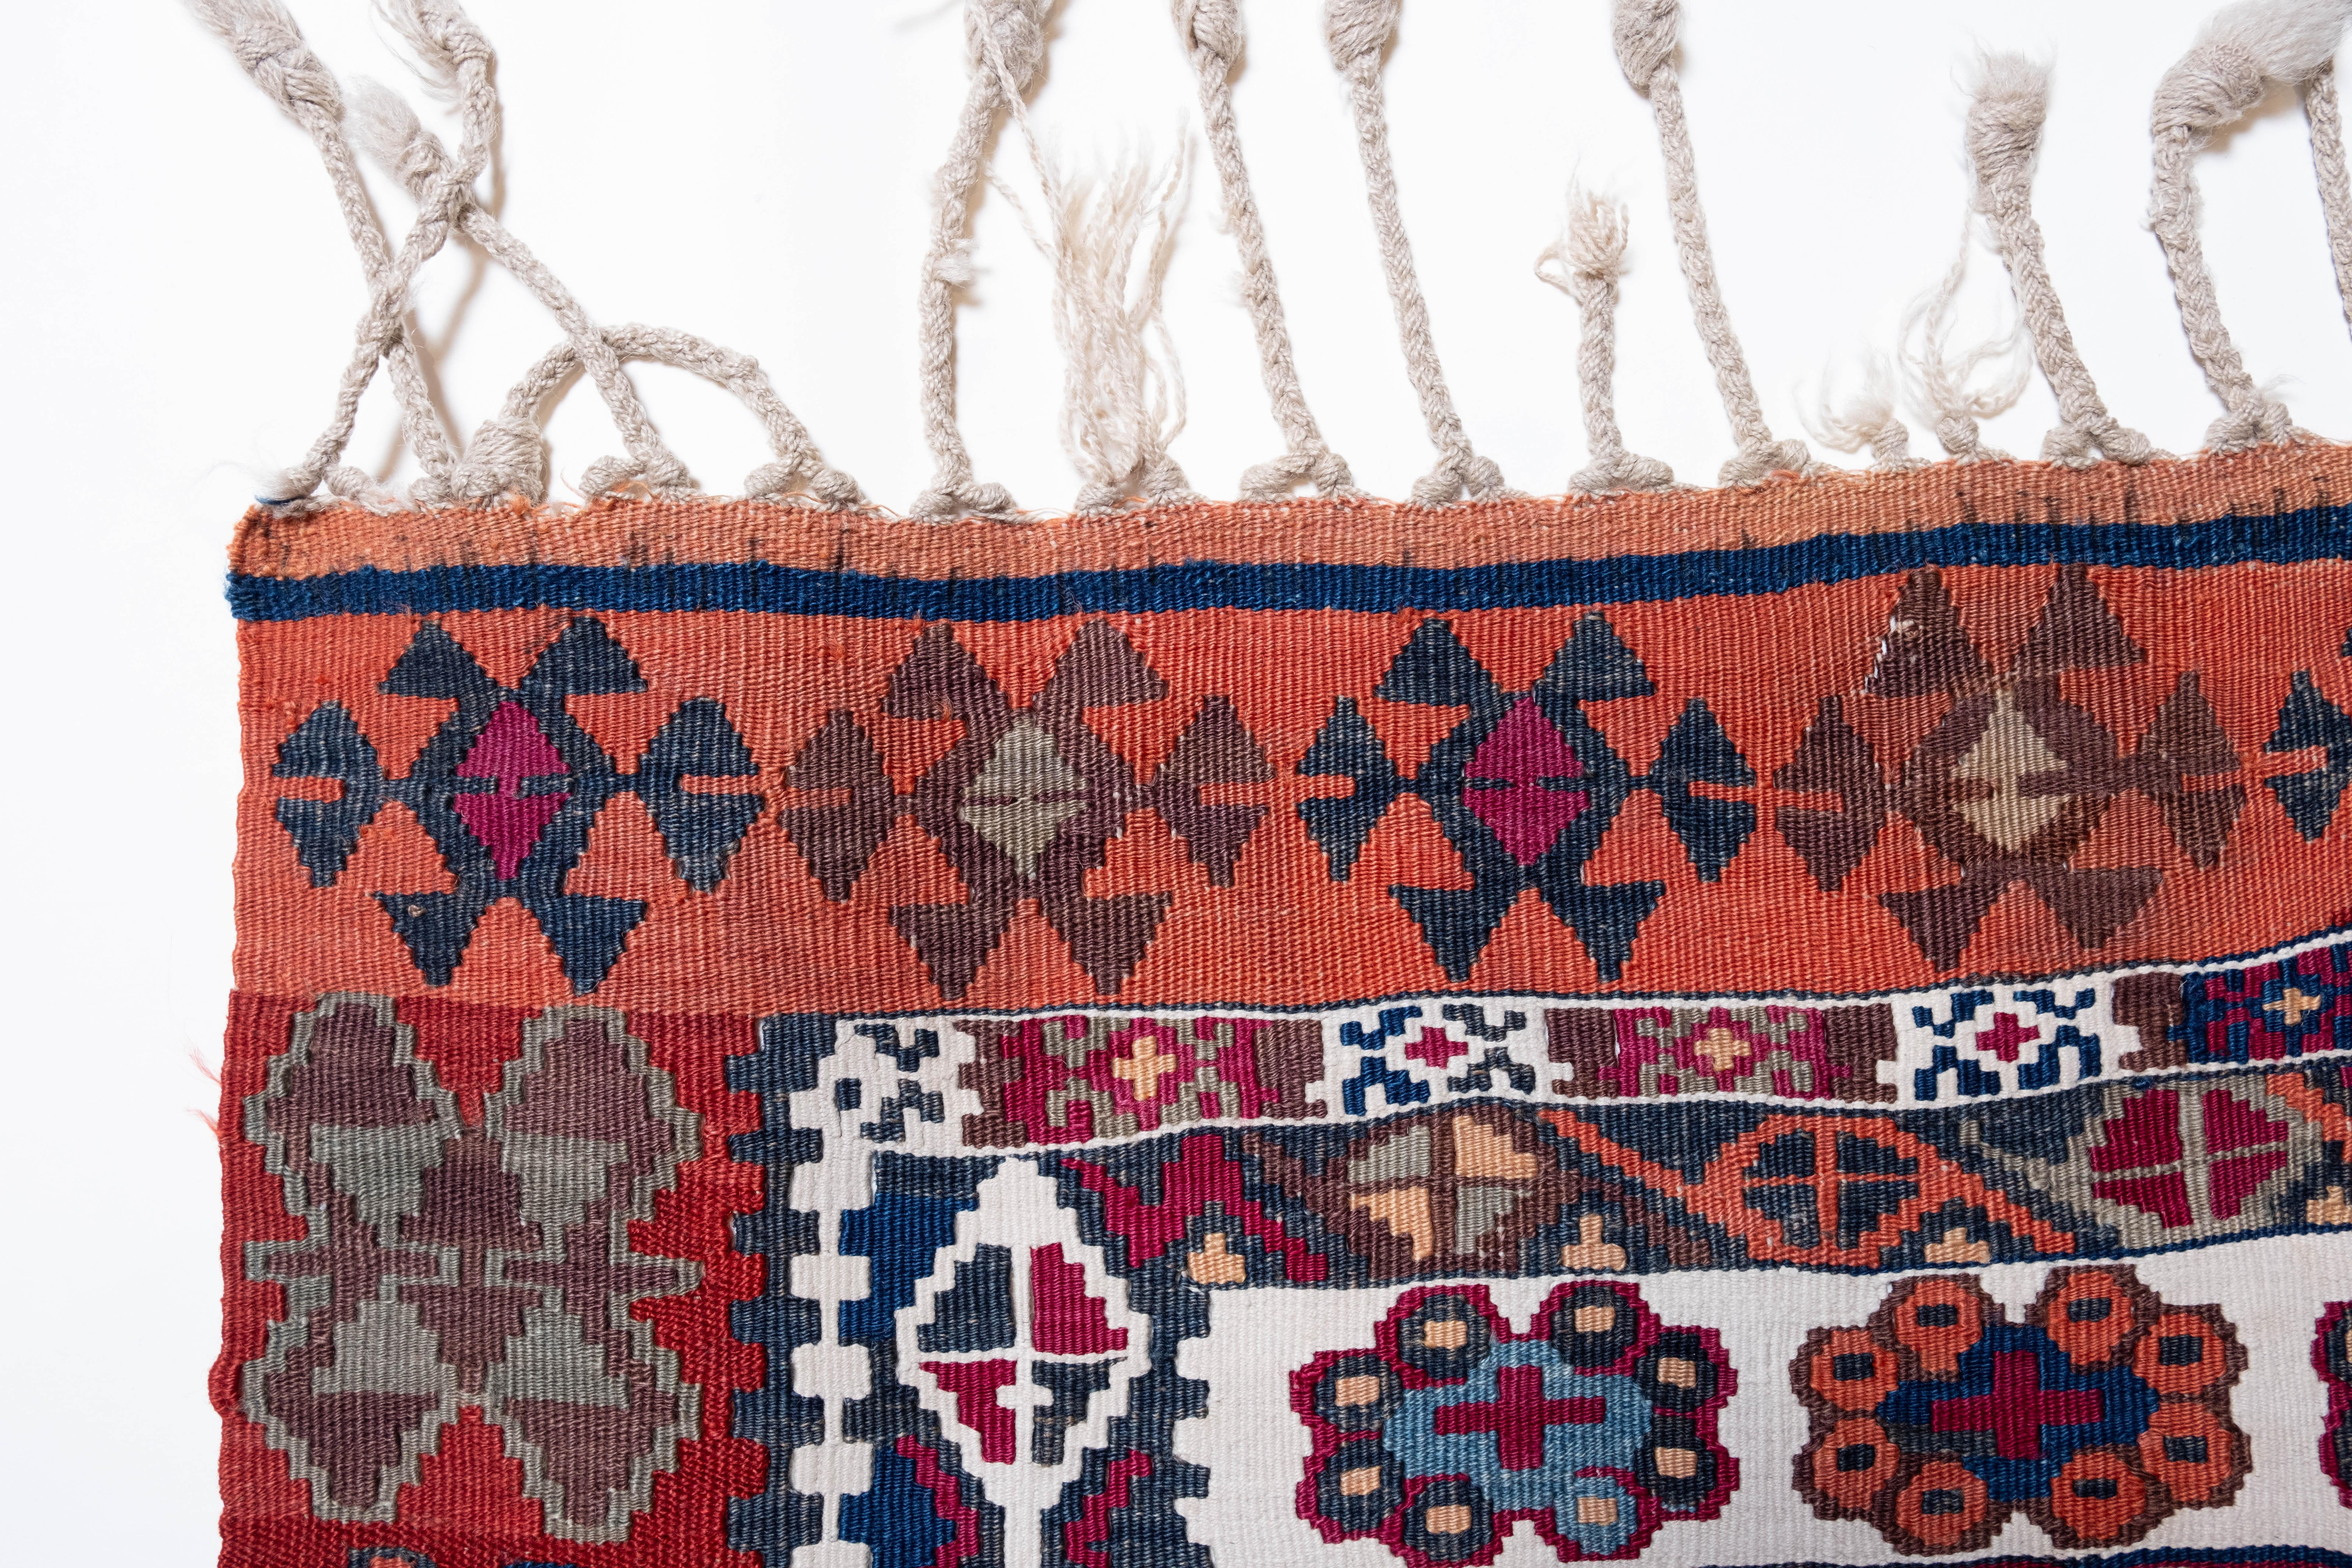 This is Central Anatolian Antique Kilim from the Corum region with a rare and beautiful color composition.

This highly collectible antique kilim has wonderful special colors and textures that are typical of an old kilim in good condition. It is a